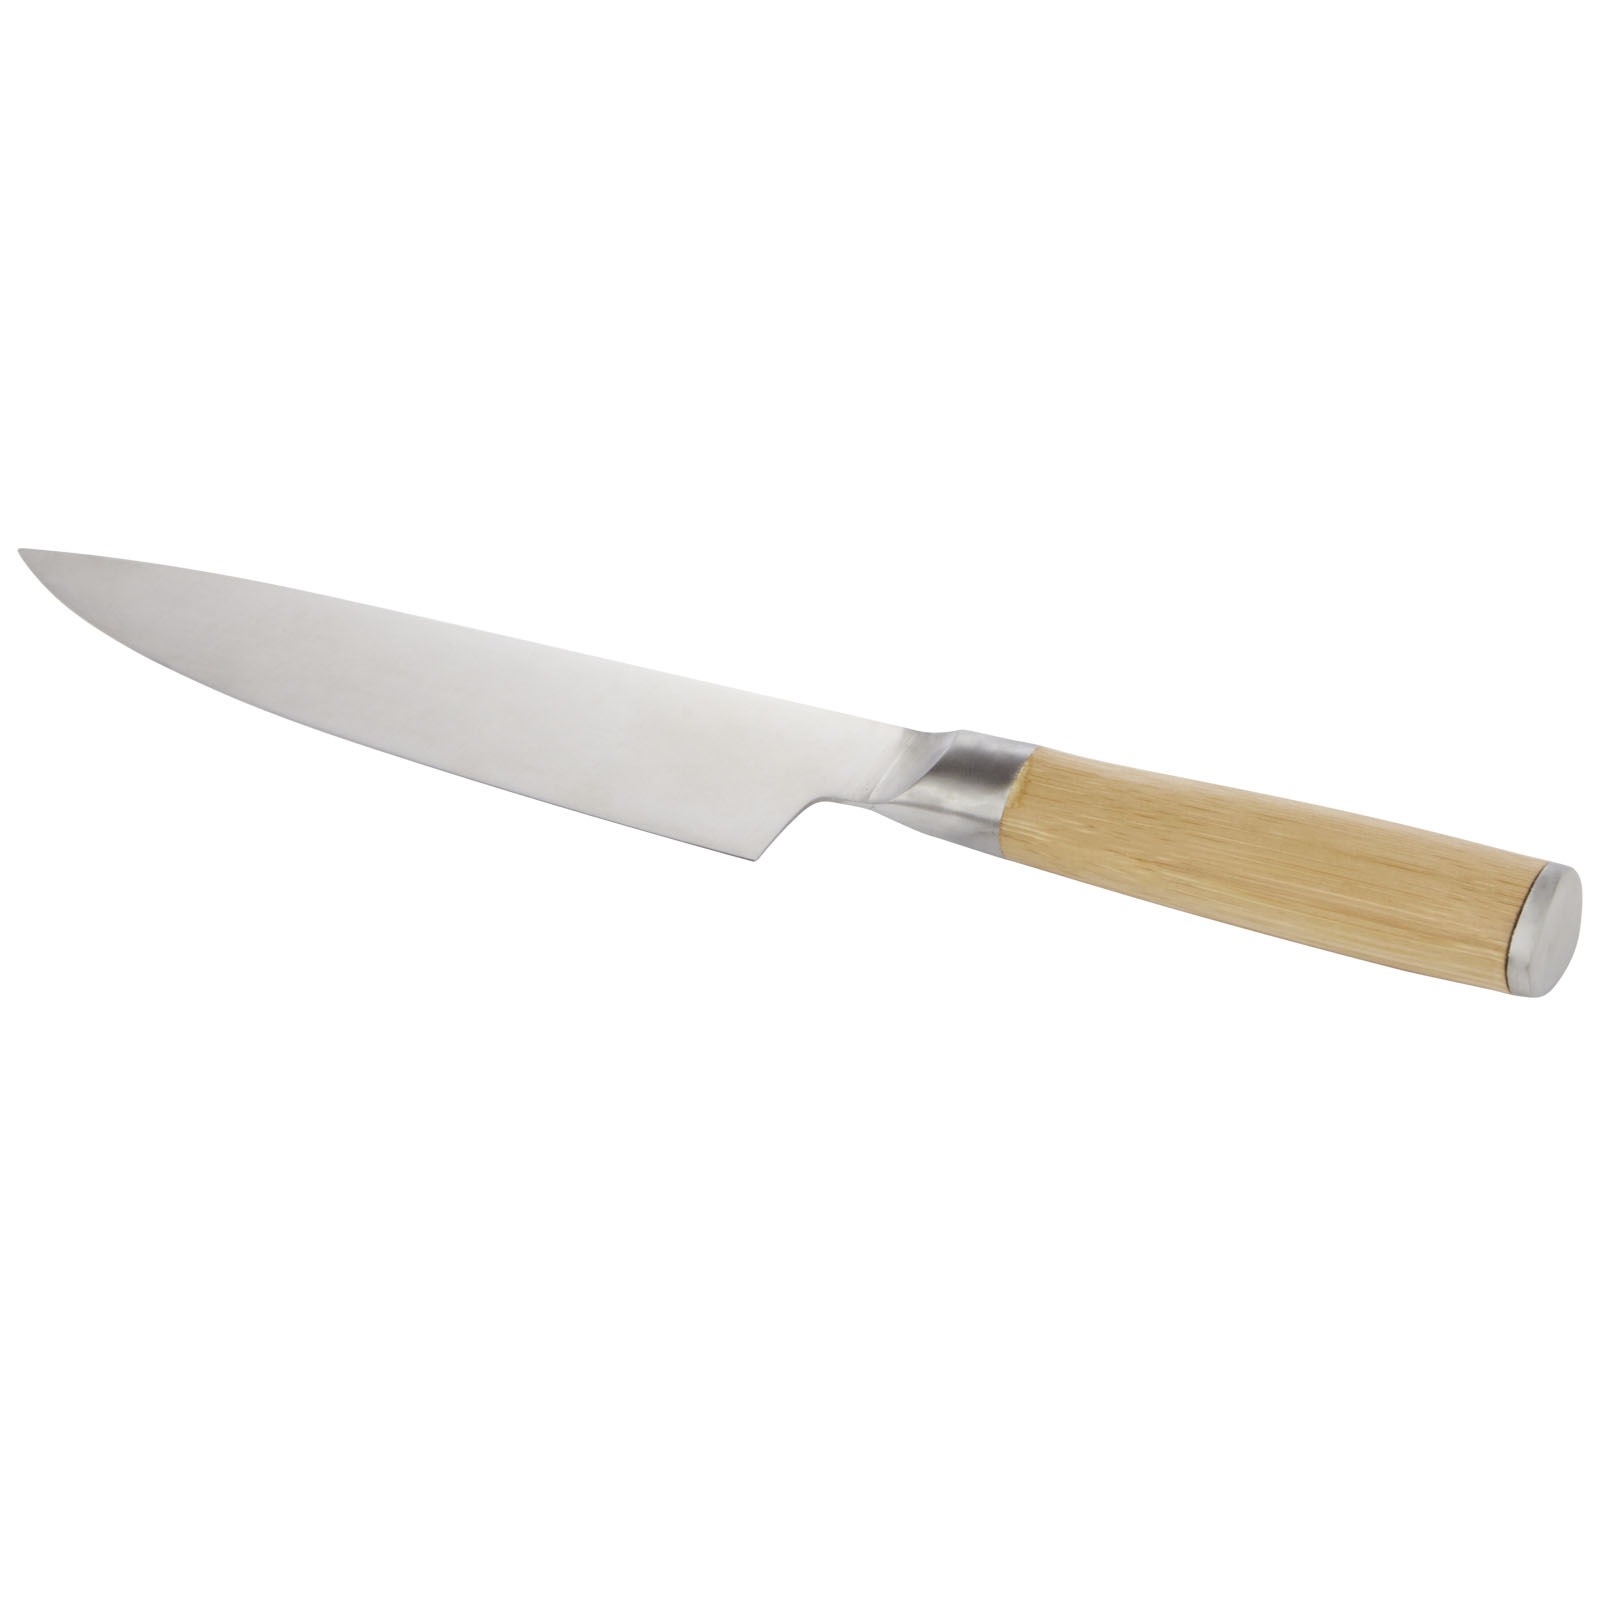 Advertising Chef's Knives - Cocin chef's knife - 0